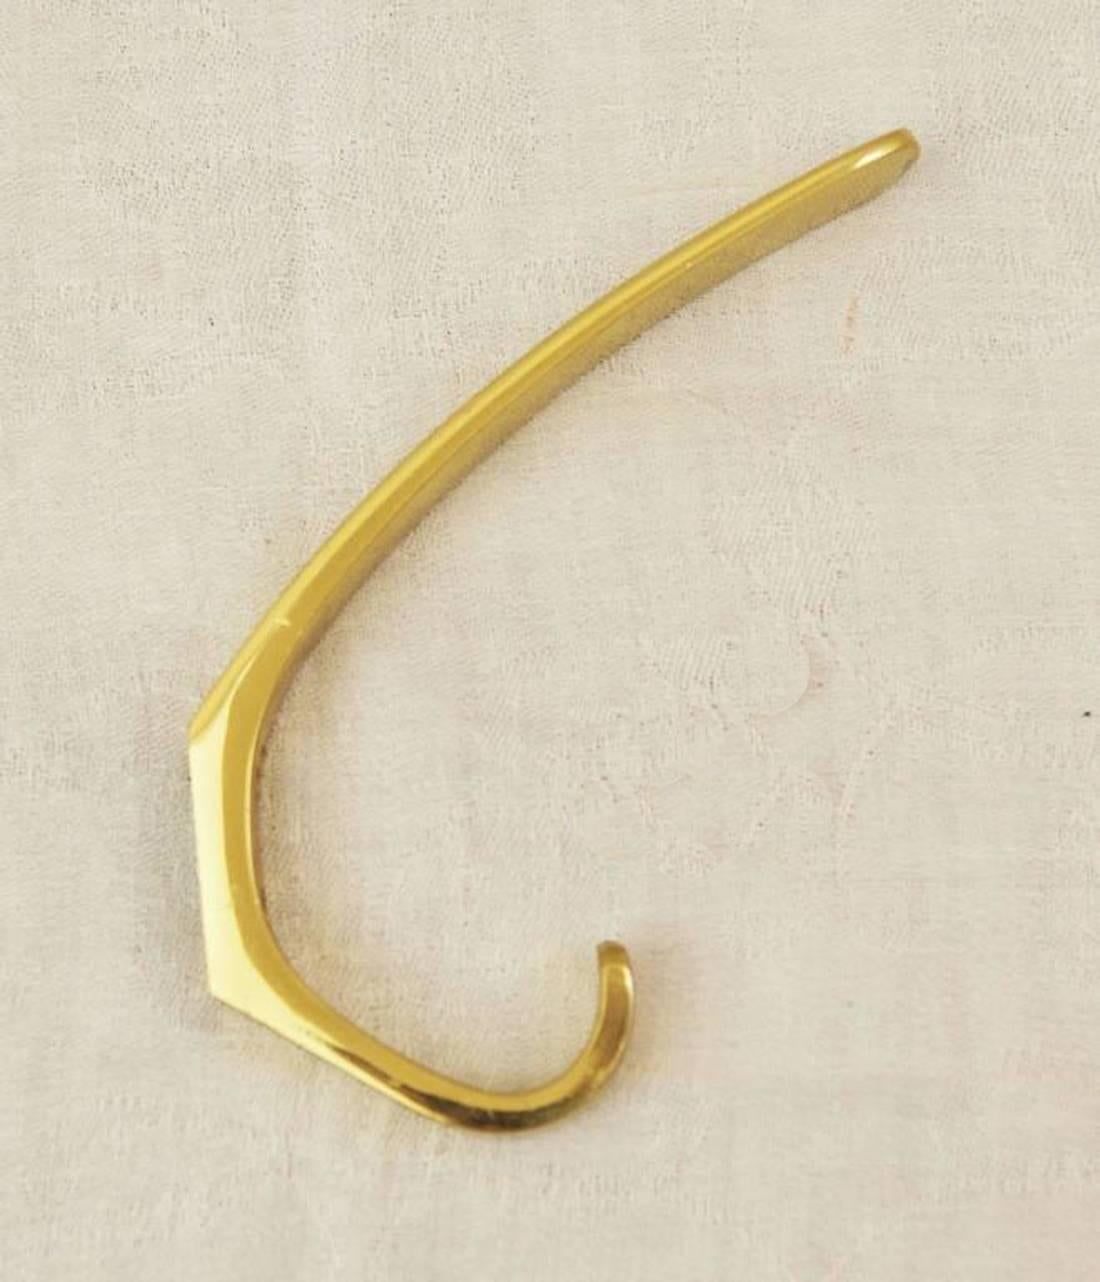 Austrian Midcentury Brass Wall Hooks by Hertha Baller In Good Condition For Sale In Vienna, AT